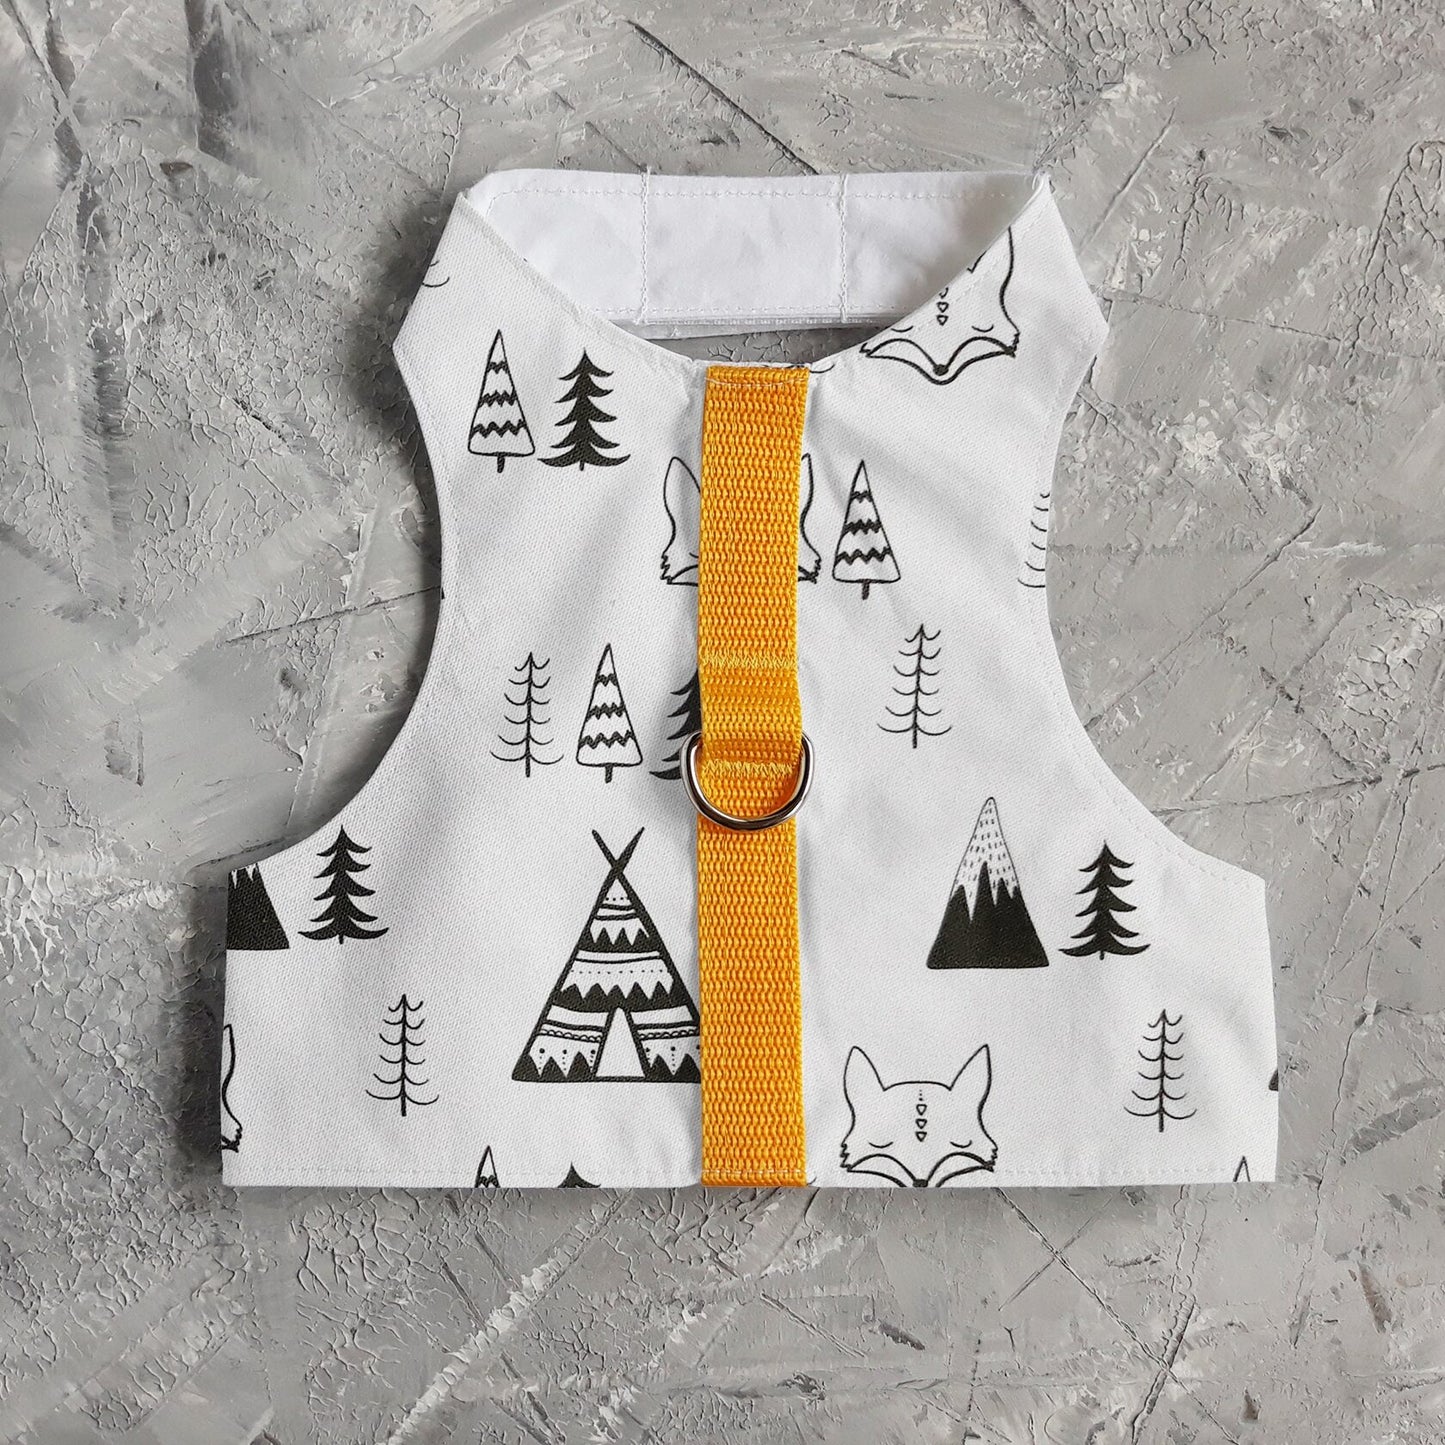 Difficult to escape and safety cat harness. Breathable cotton vest with foxes print